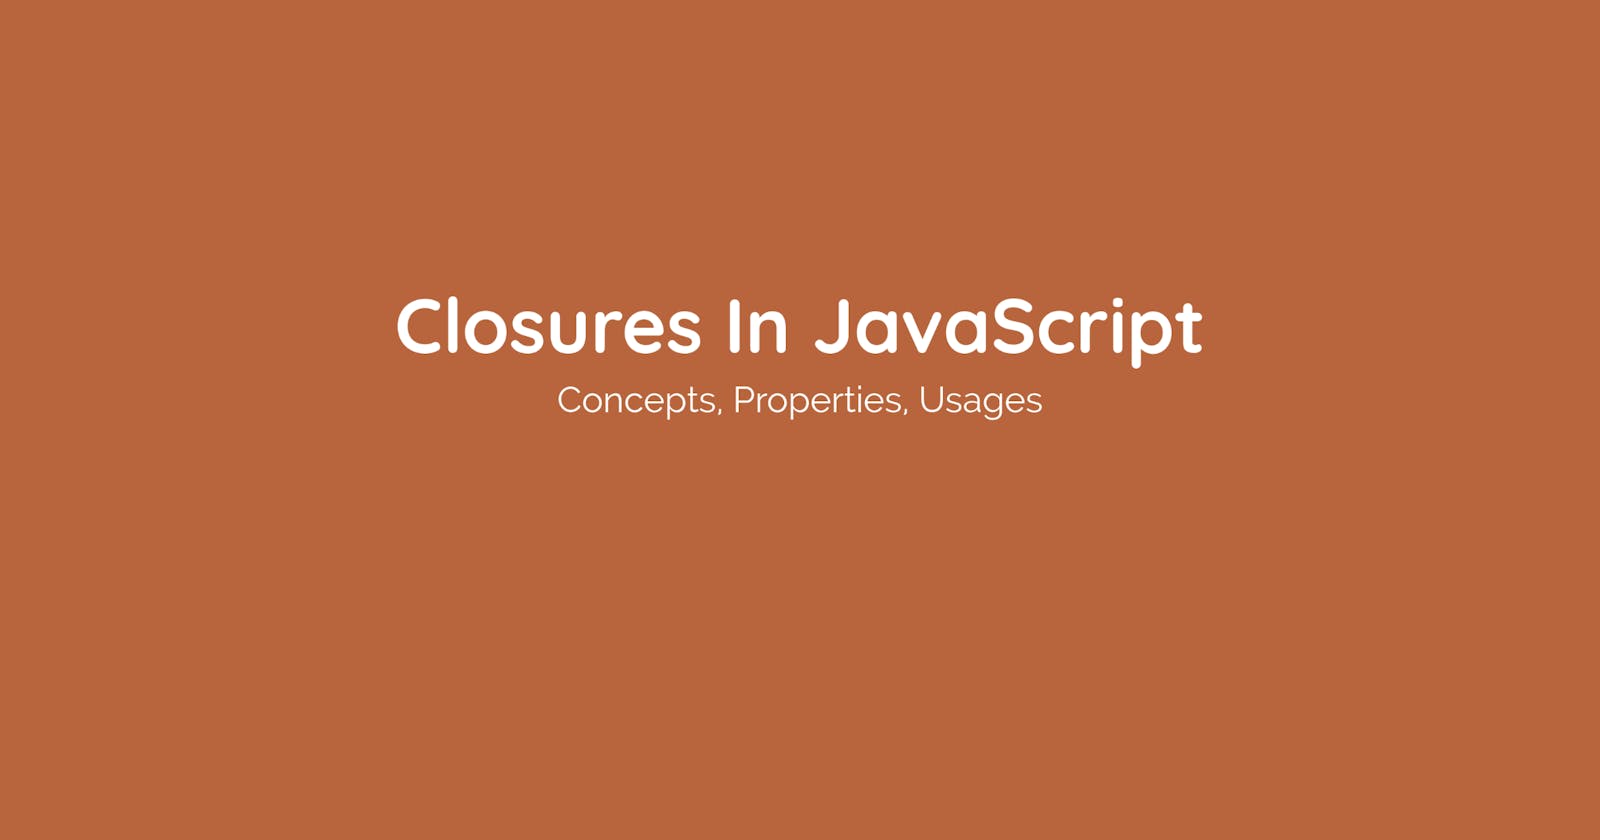 Closures and It's Properties